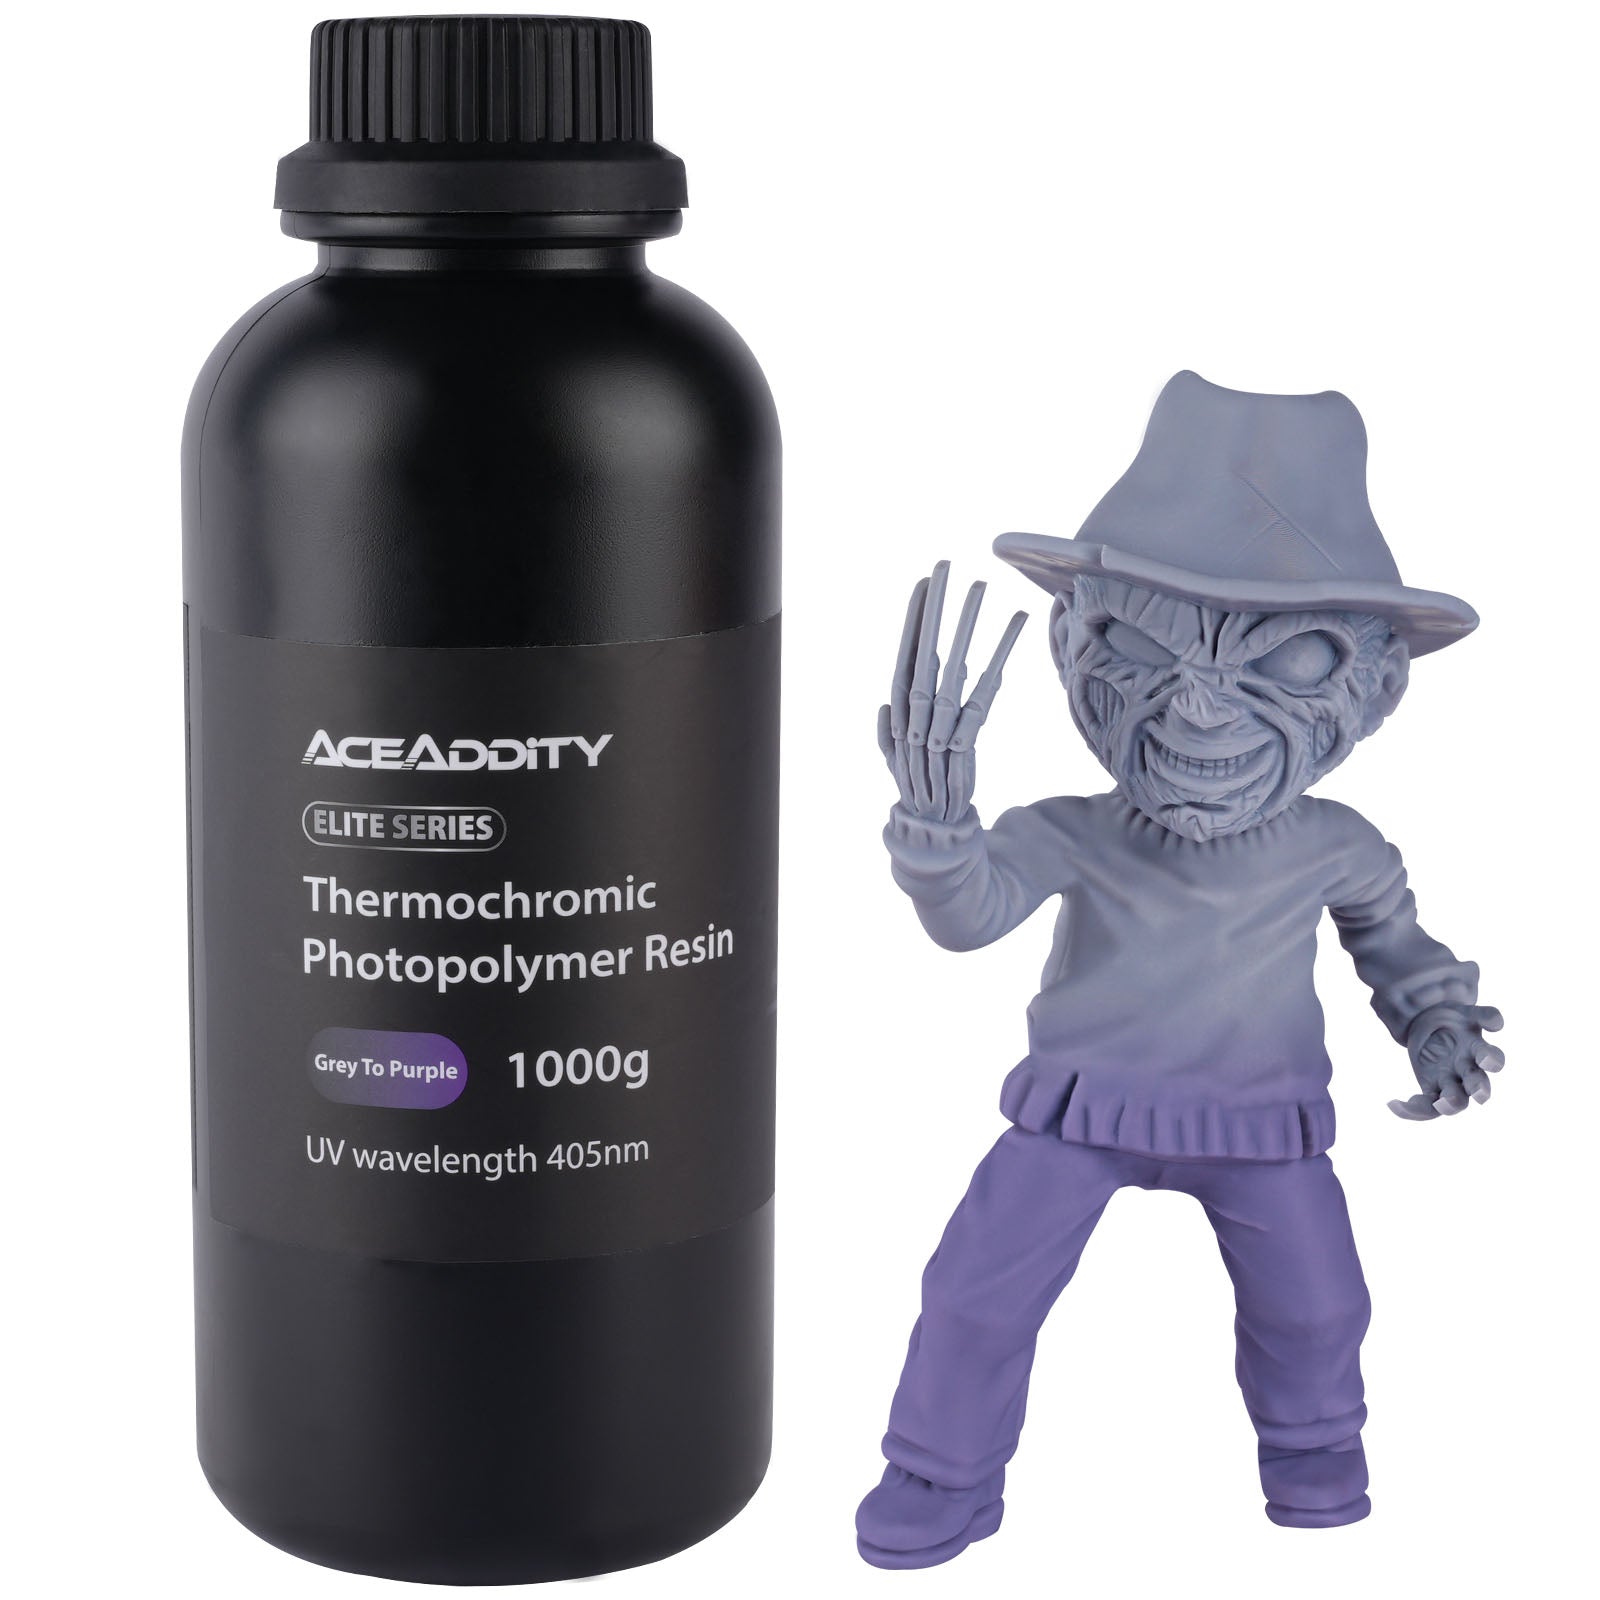 Aceaddity Thermochromic Resin Turning from Grey to Purple